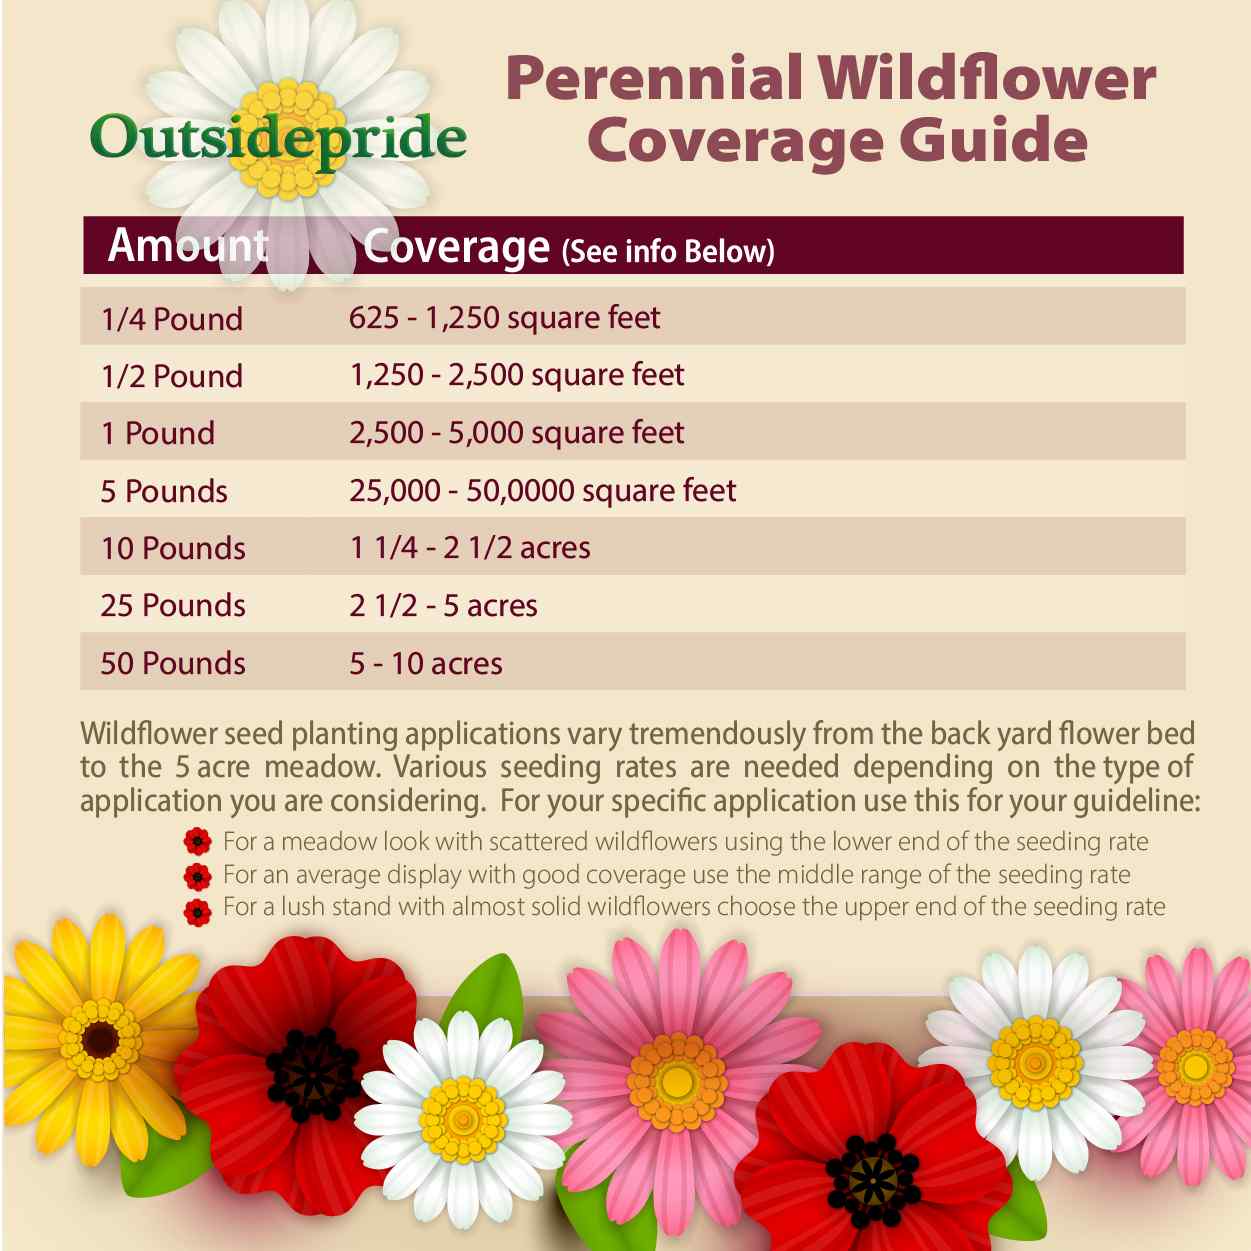 All Perennial Wildflower Seed Mix